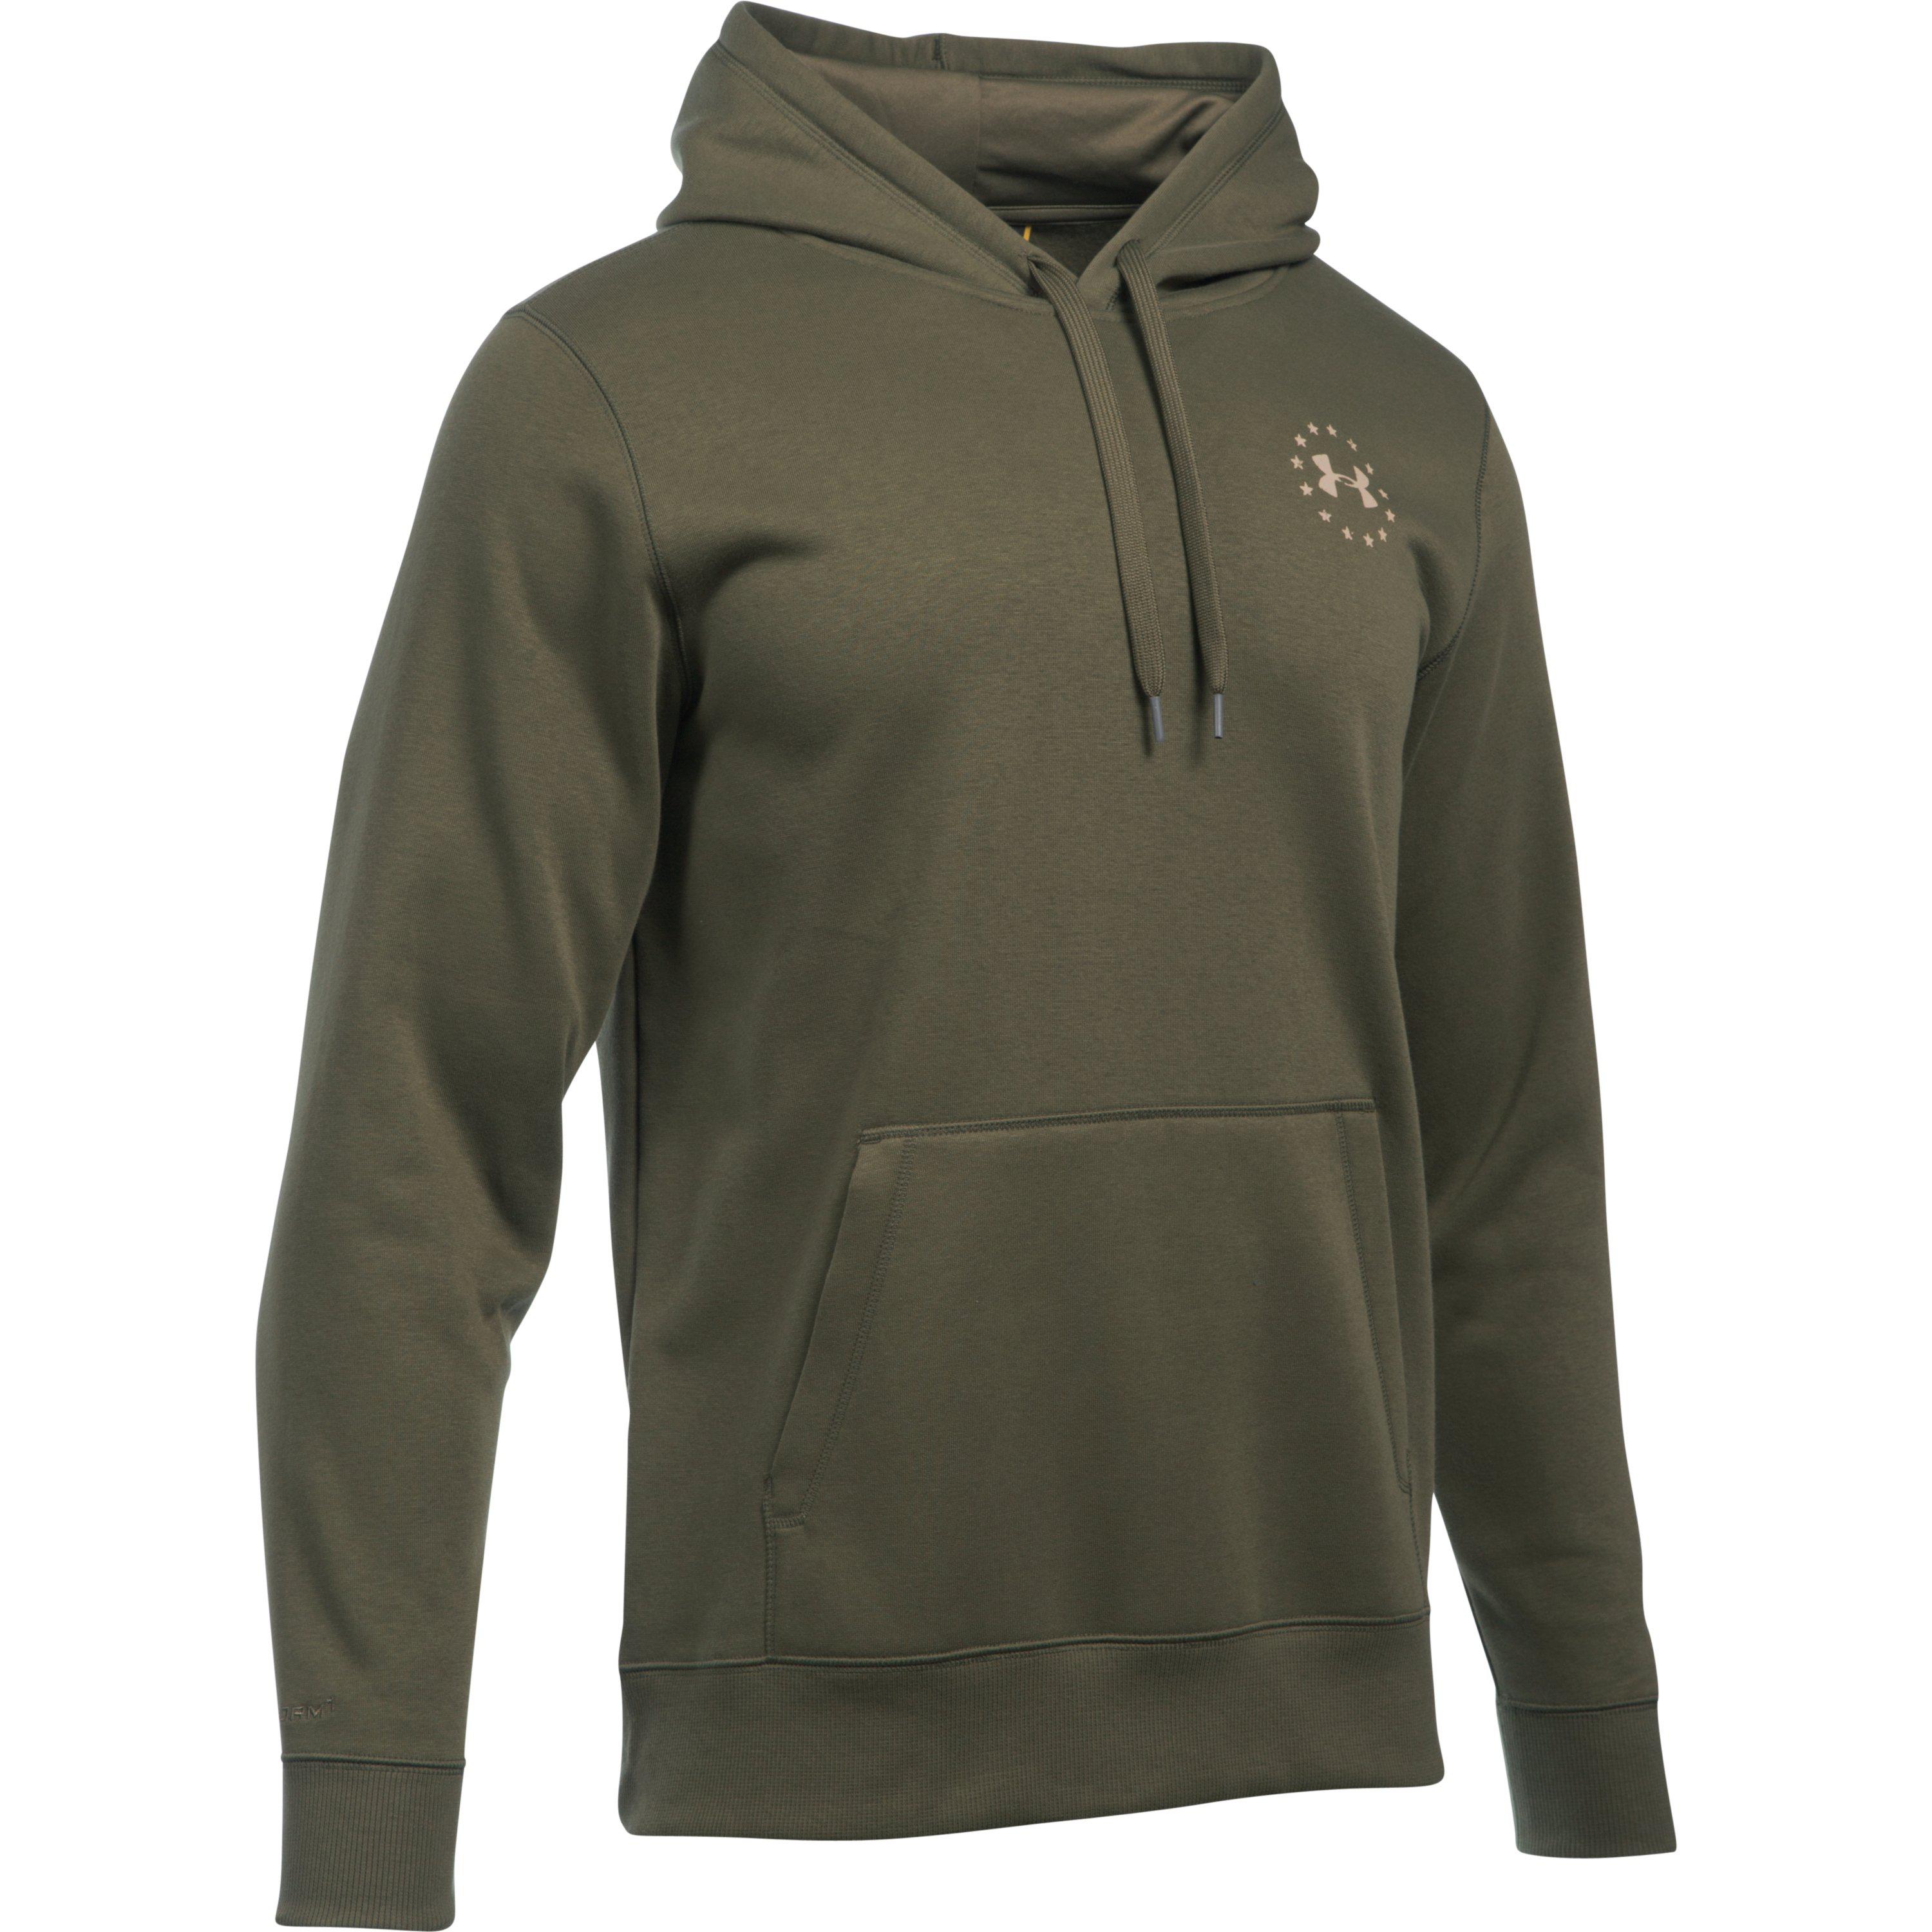 Under Armour Cotton Men's Ua Freedom Flag Hoodie in Marine od Green ...